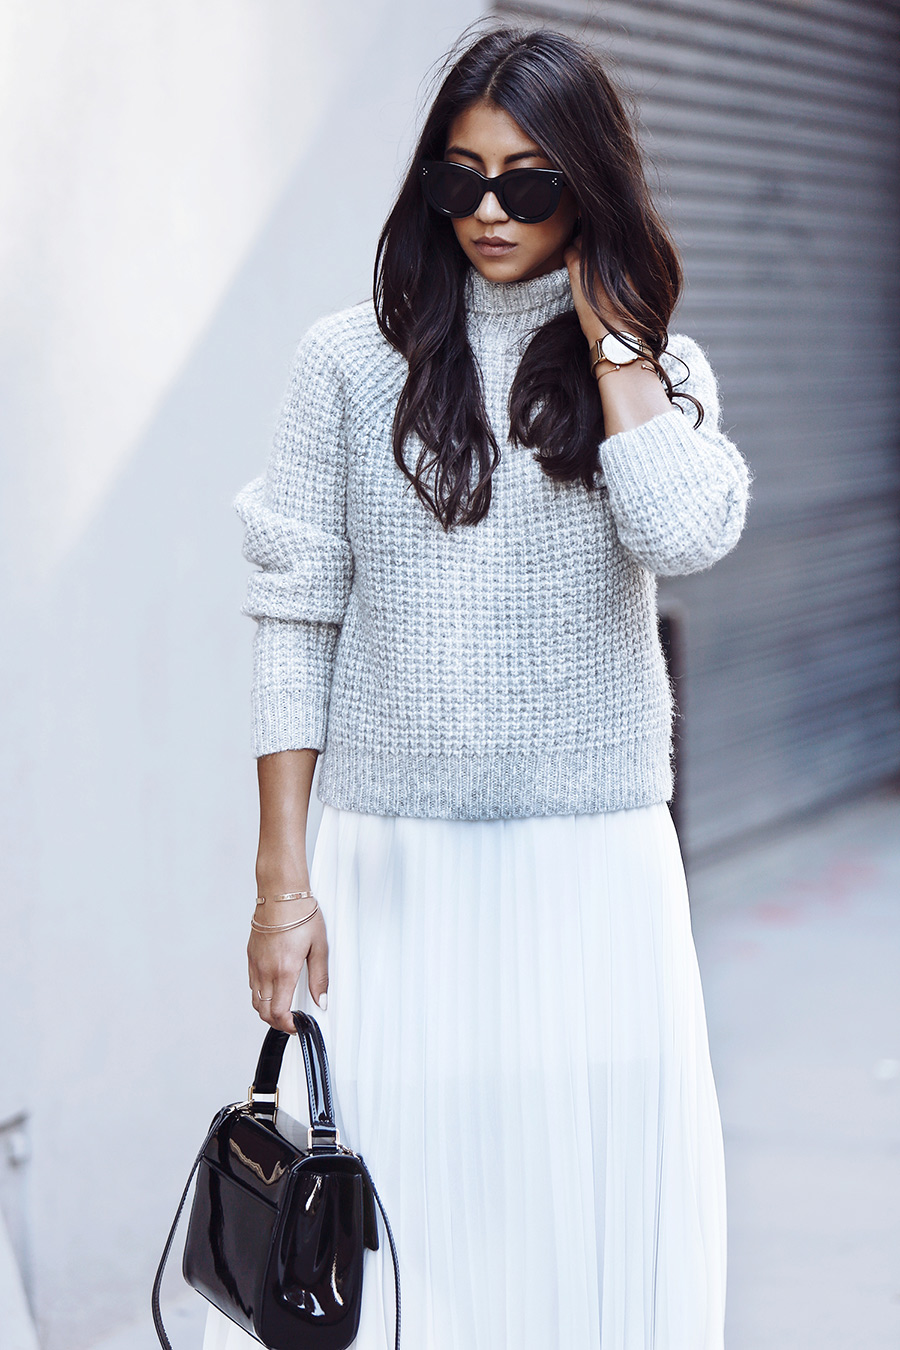 Steal Her Style: City Elegance by Kayla | Love Daily Dose